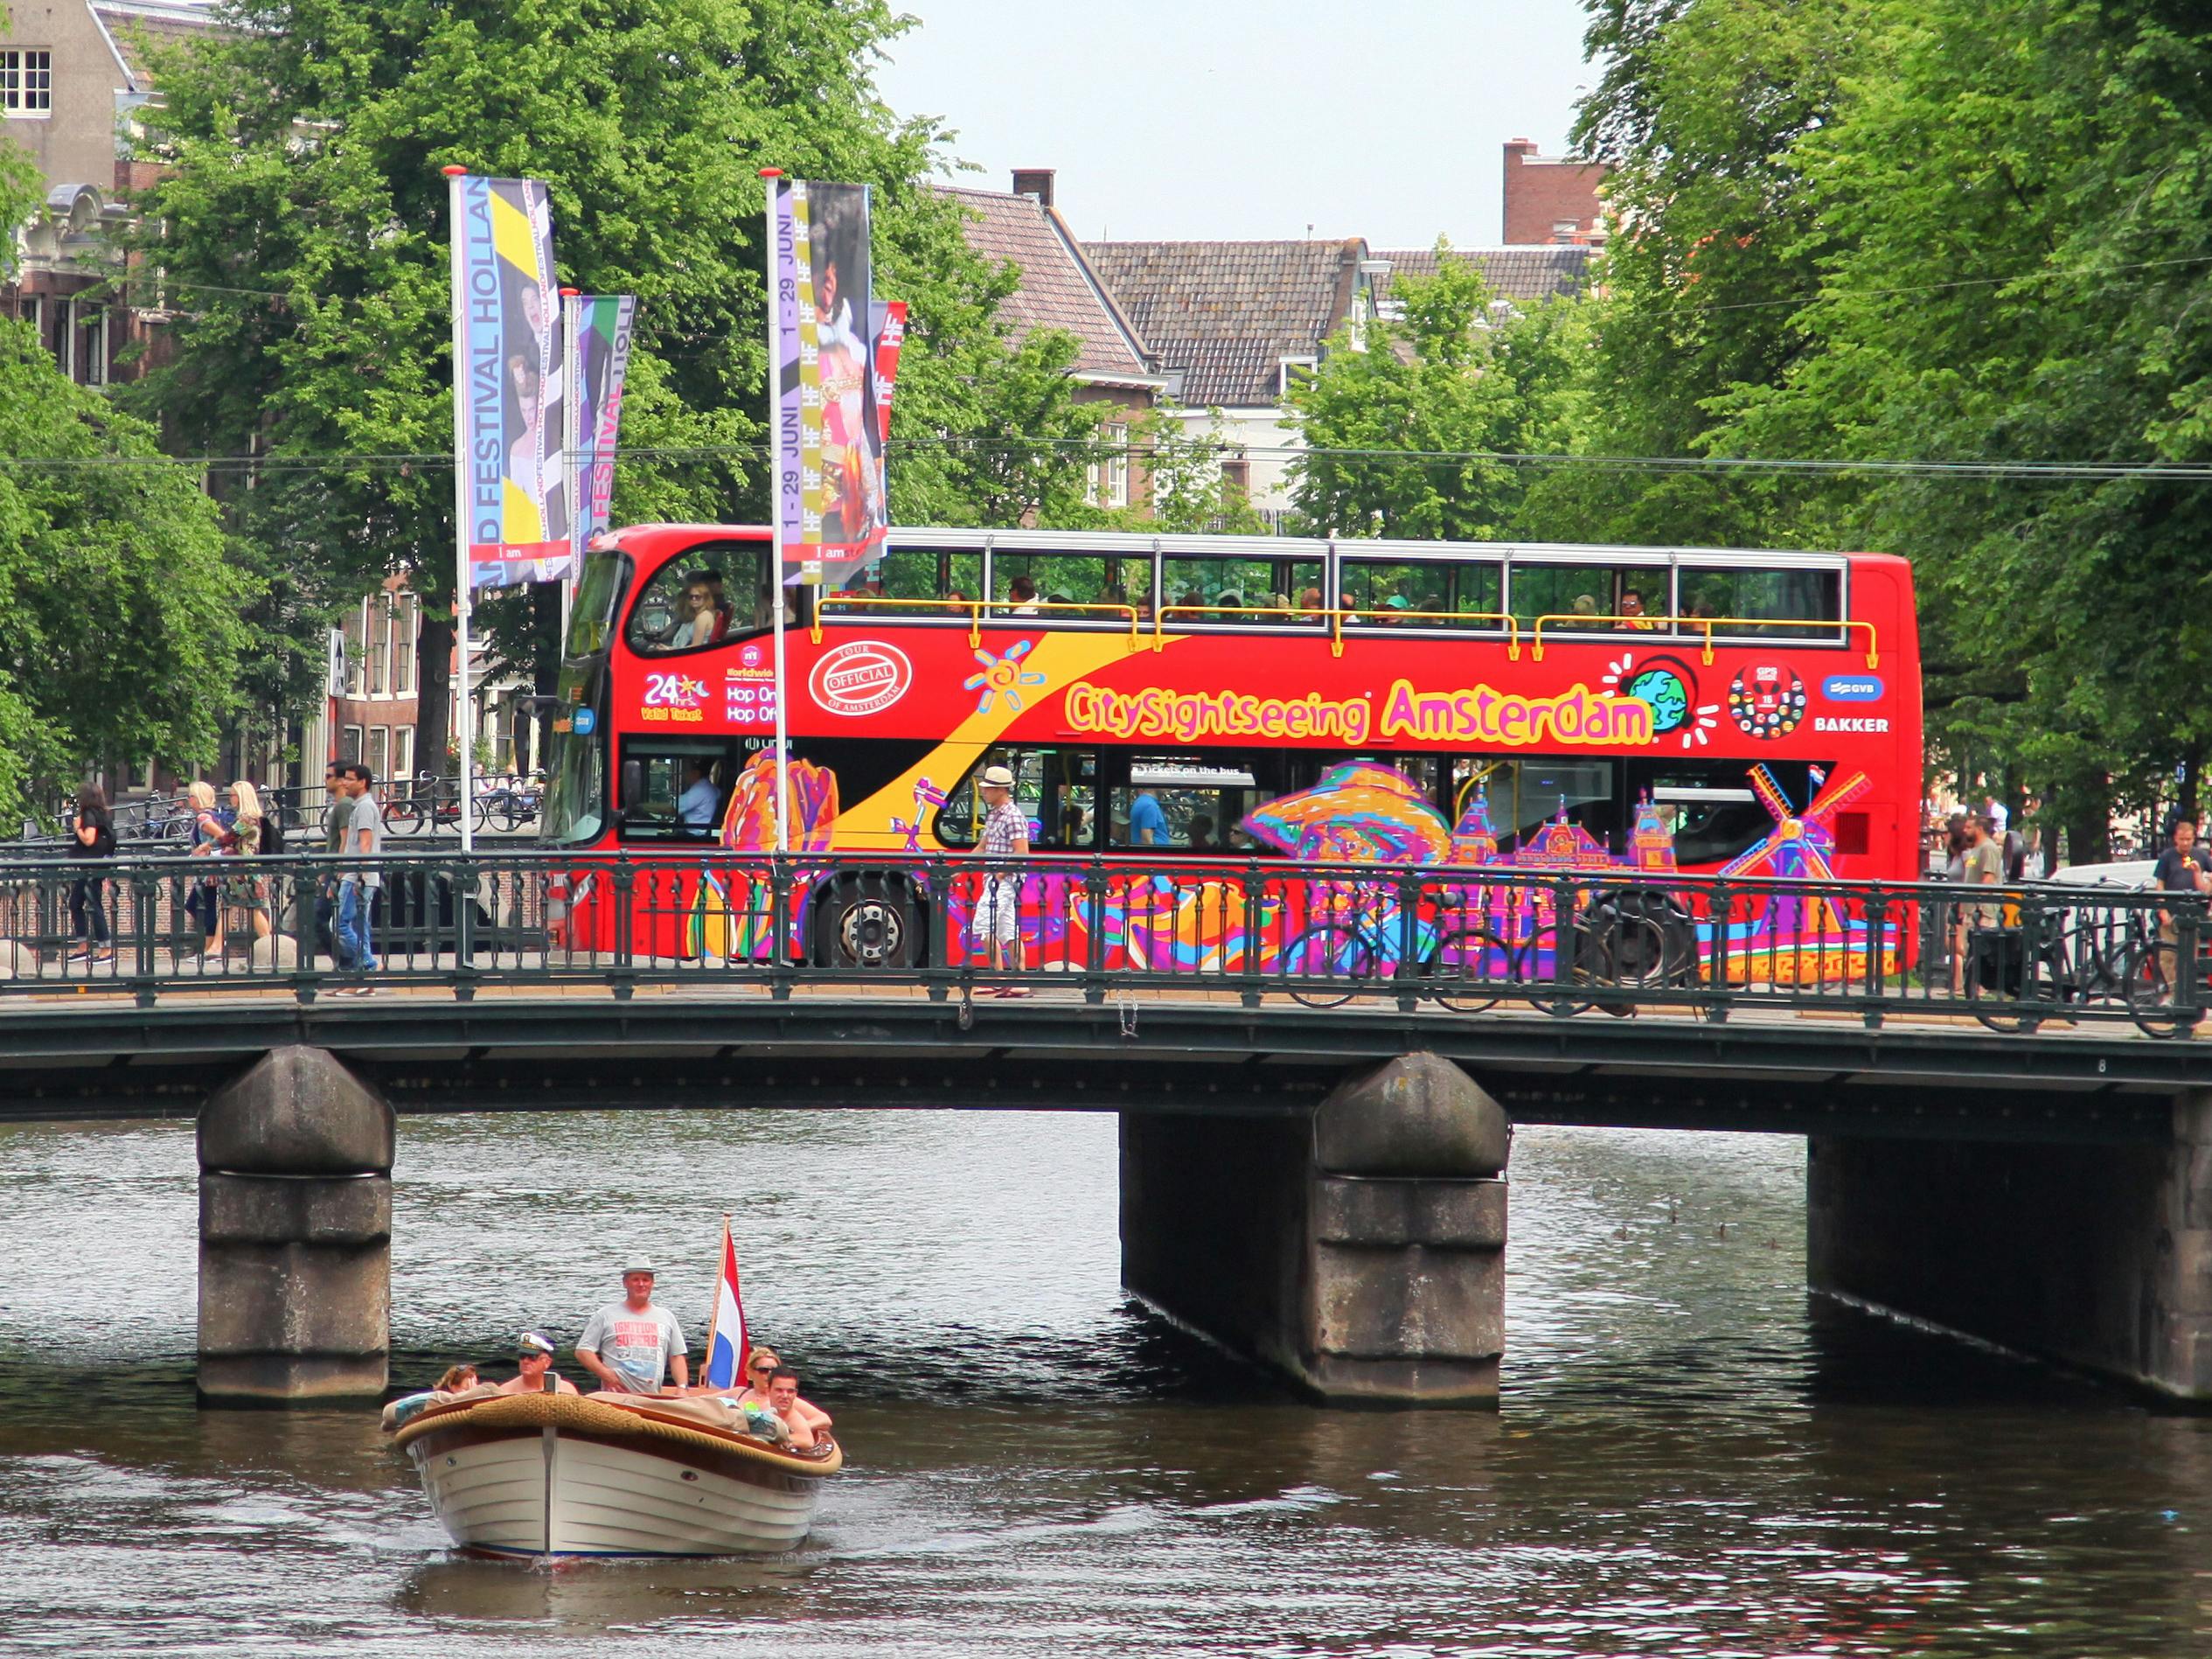 City Sightseeing hop-on hop-off bus tour of Amsterdam with optional canal cruise